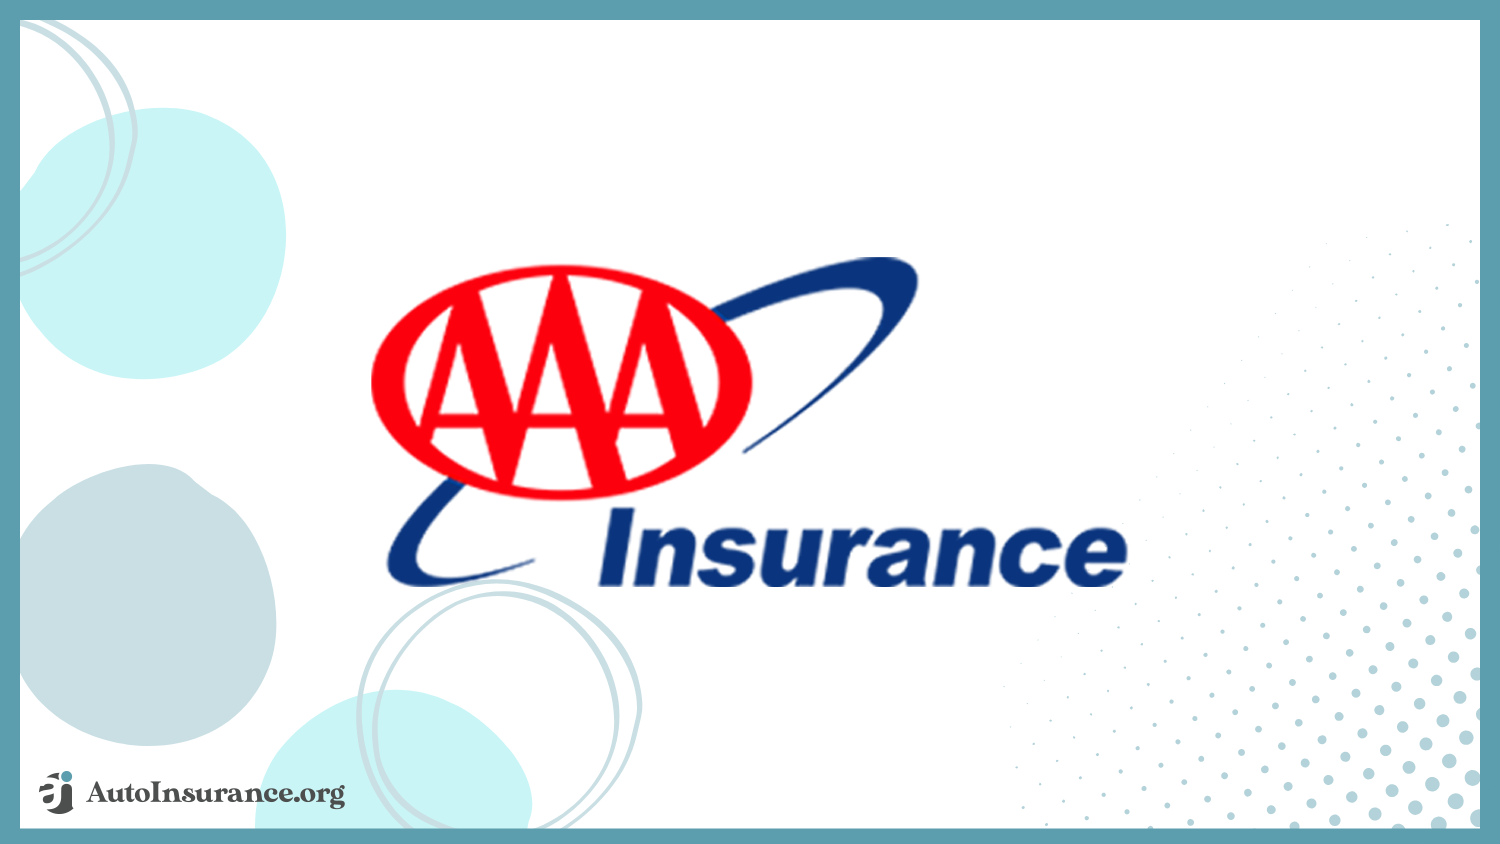 AAA: Best Auto Insurance for the Wealthy